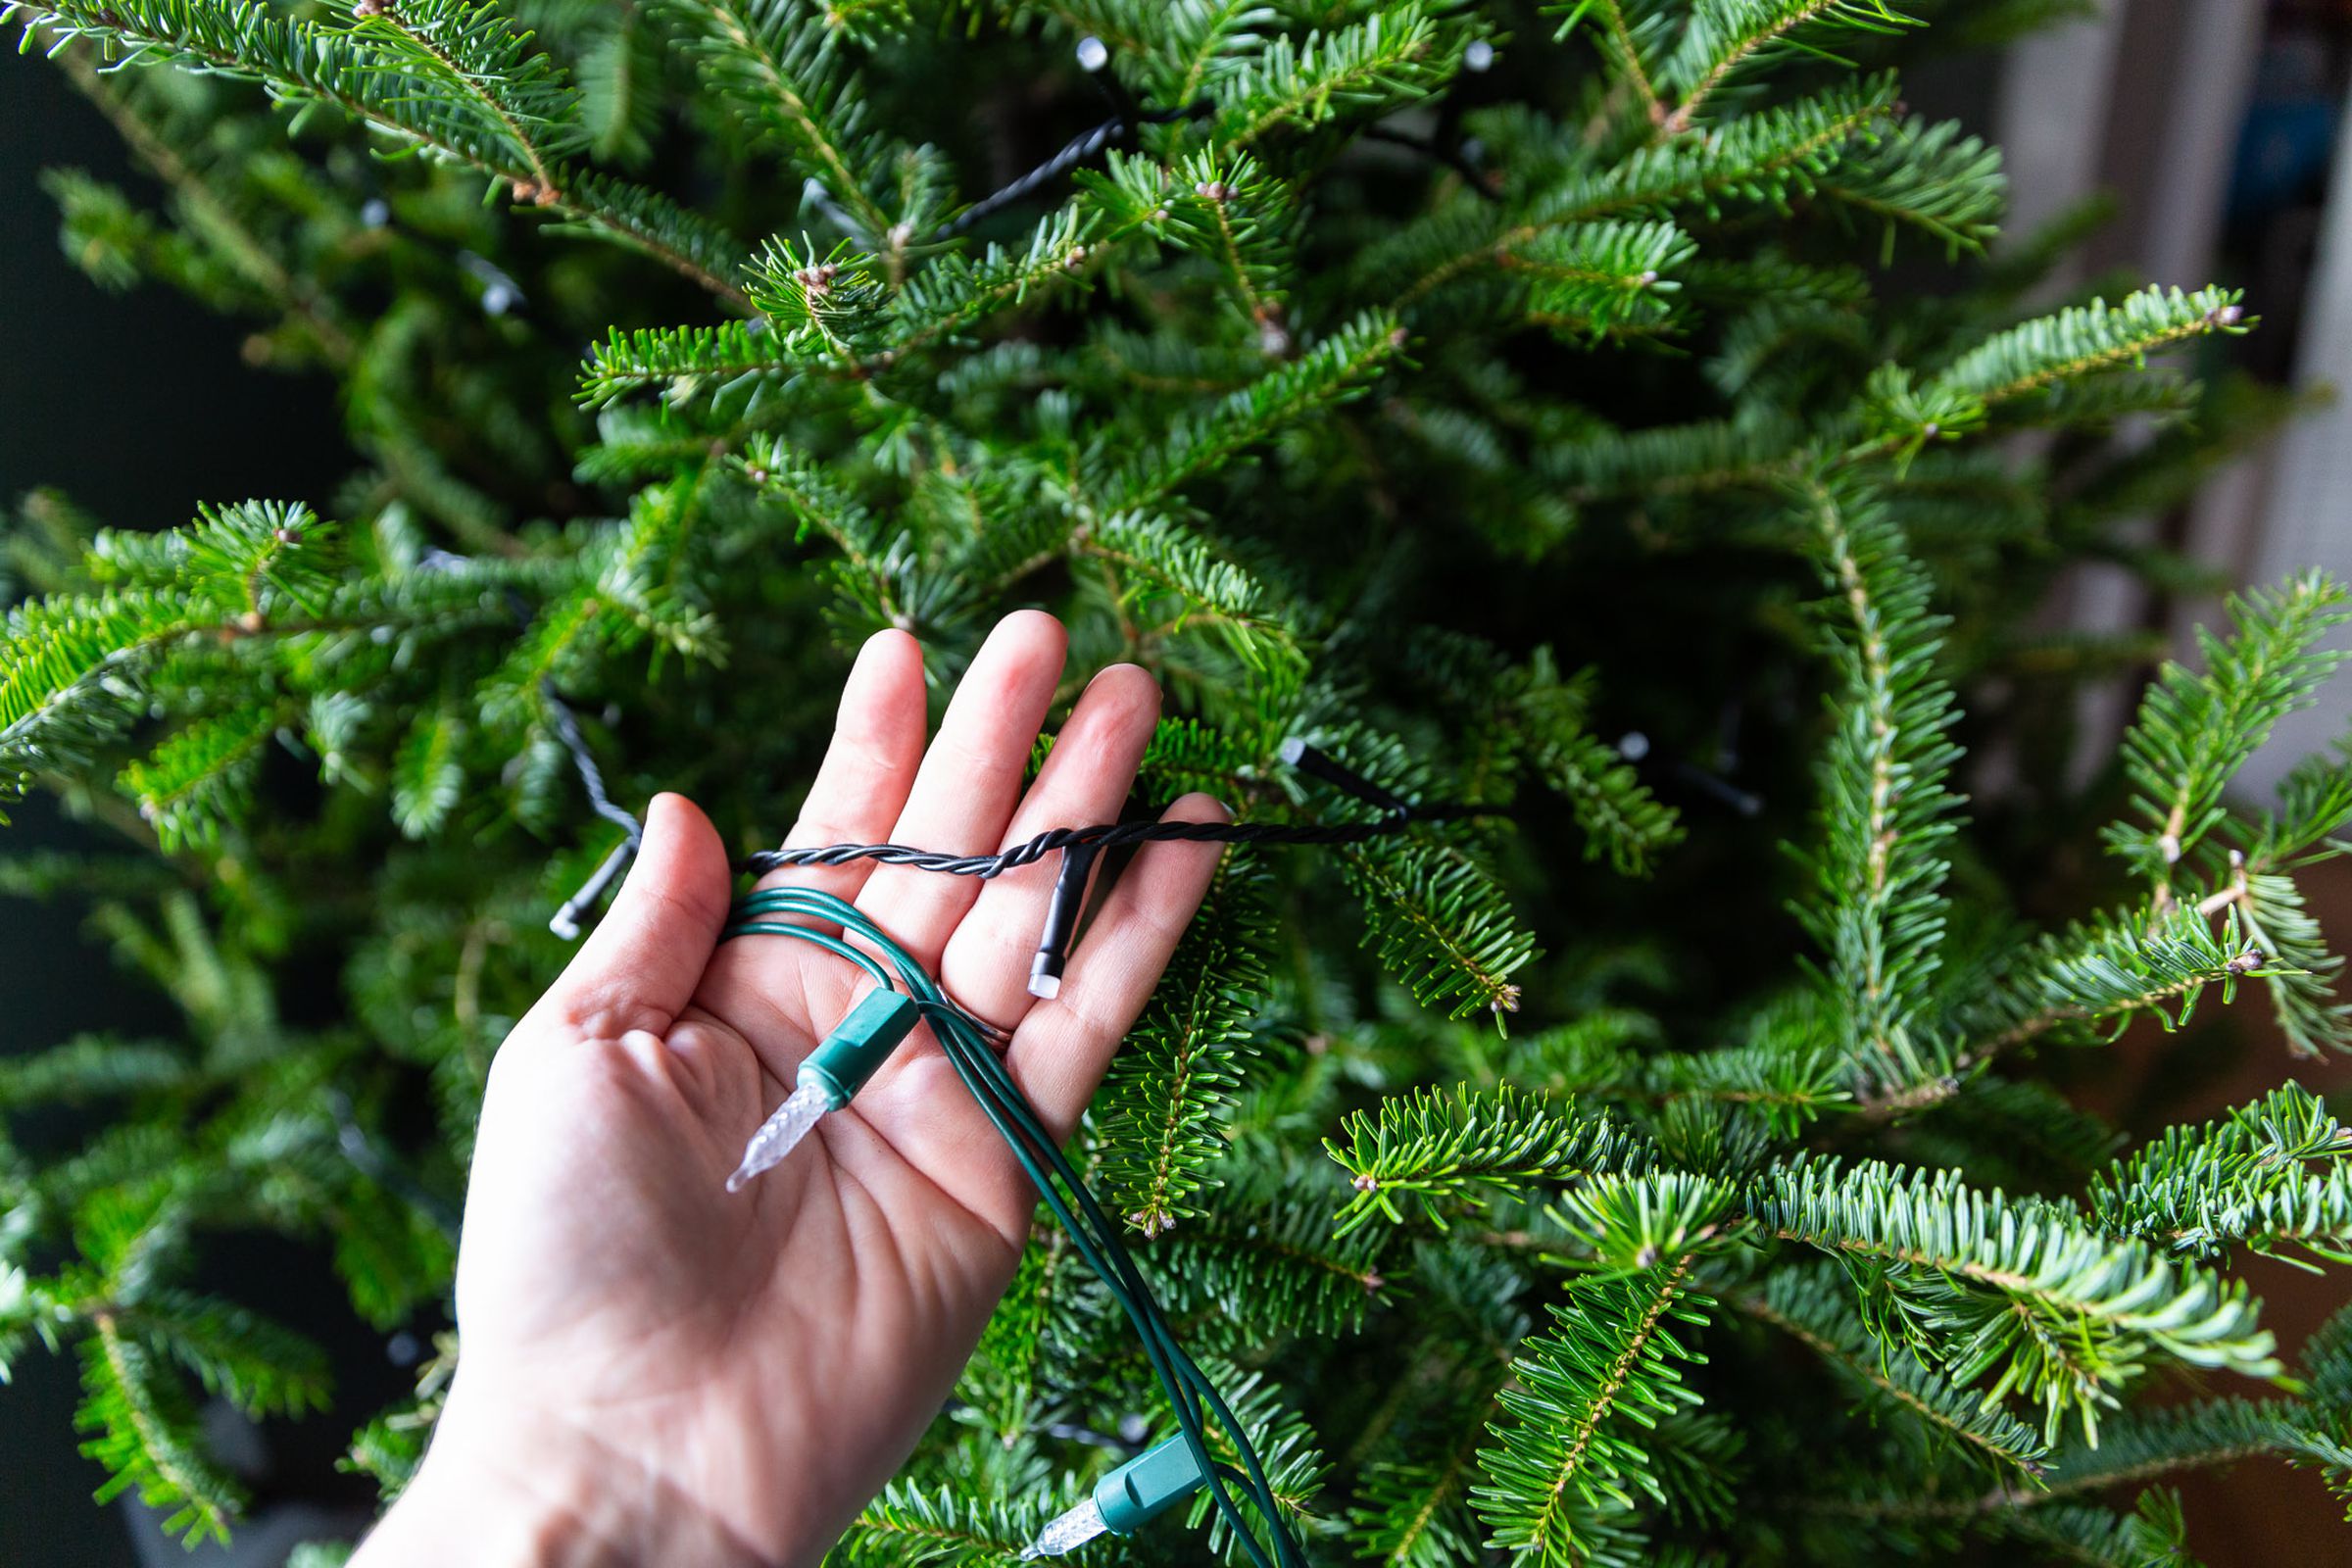 A hand in front of a christmas tree, with a standard strand of string lights and a much thinner strand of hue string lights.